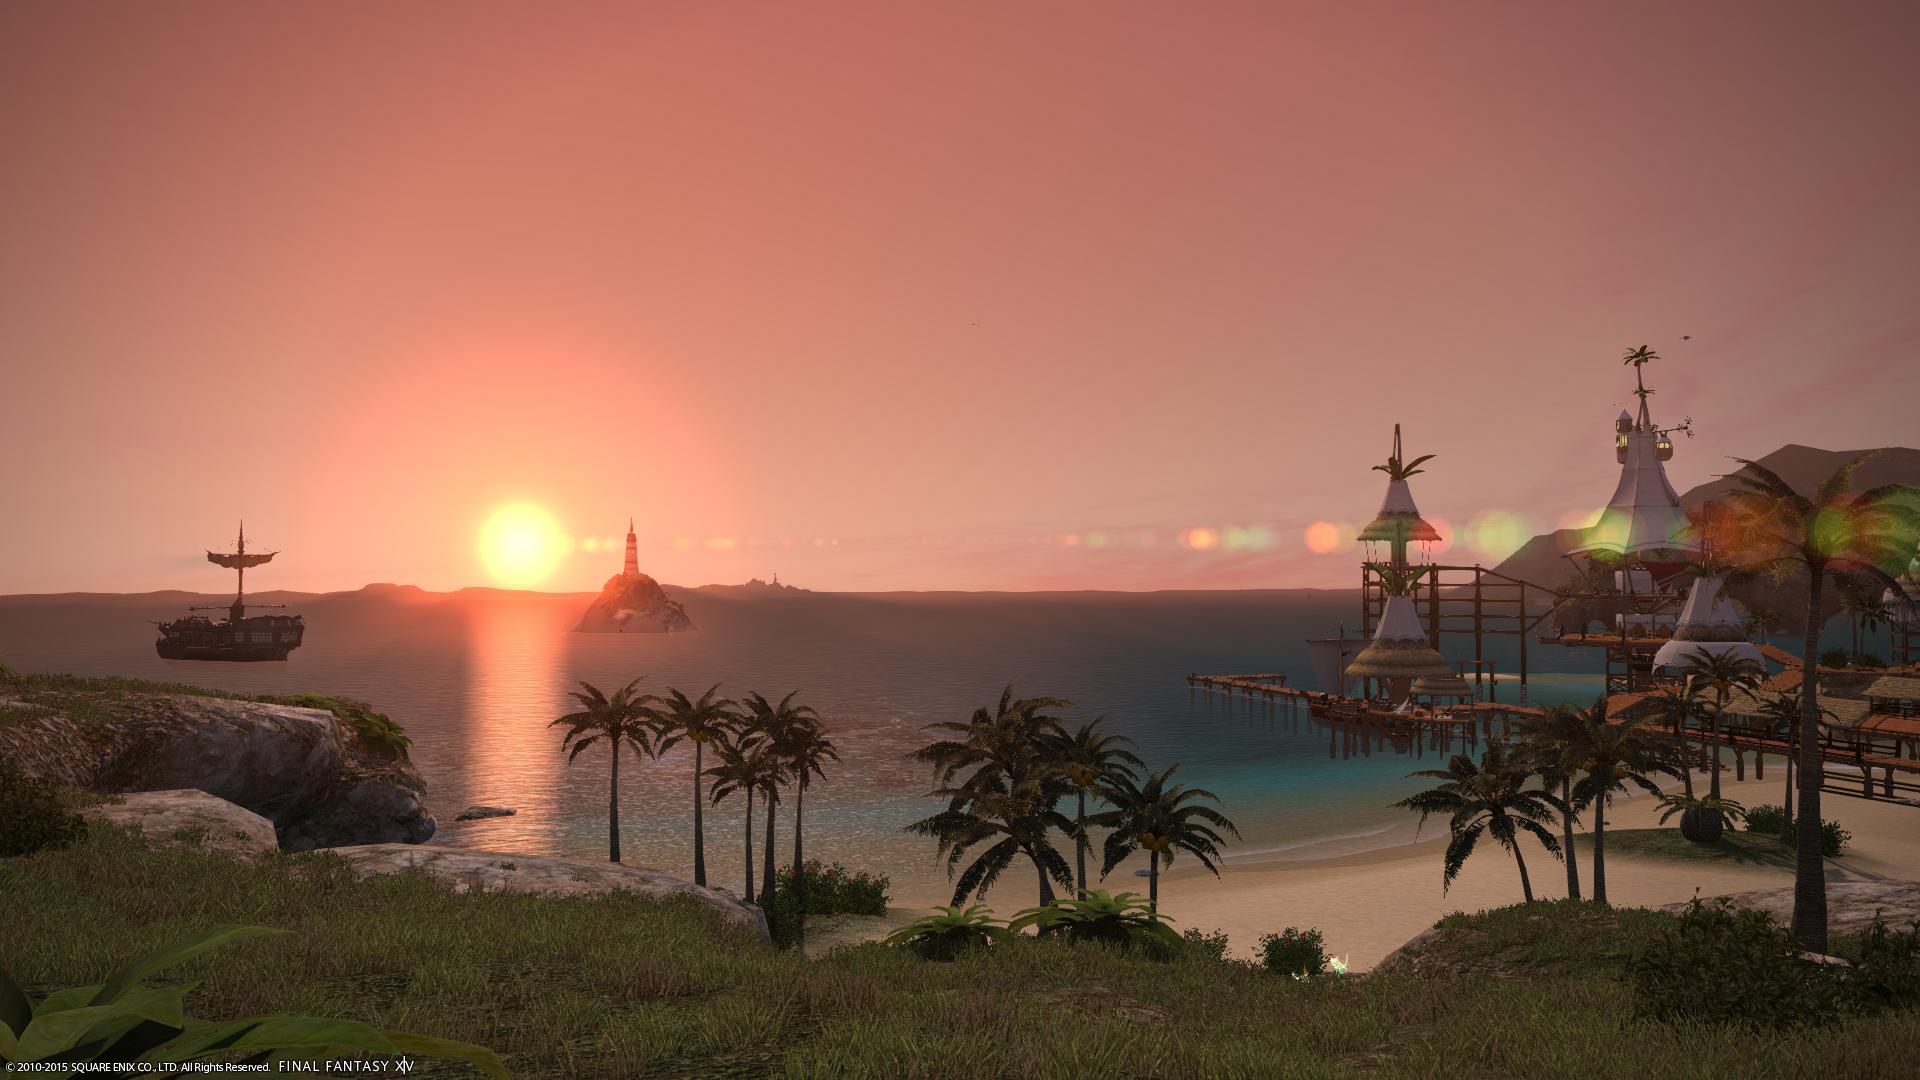 Finally experienced my first Costa del Sol sunset. Not disappointed